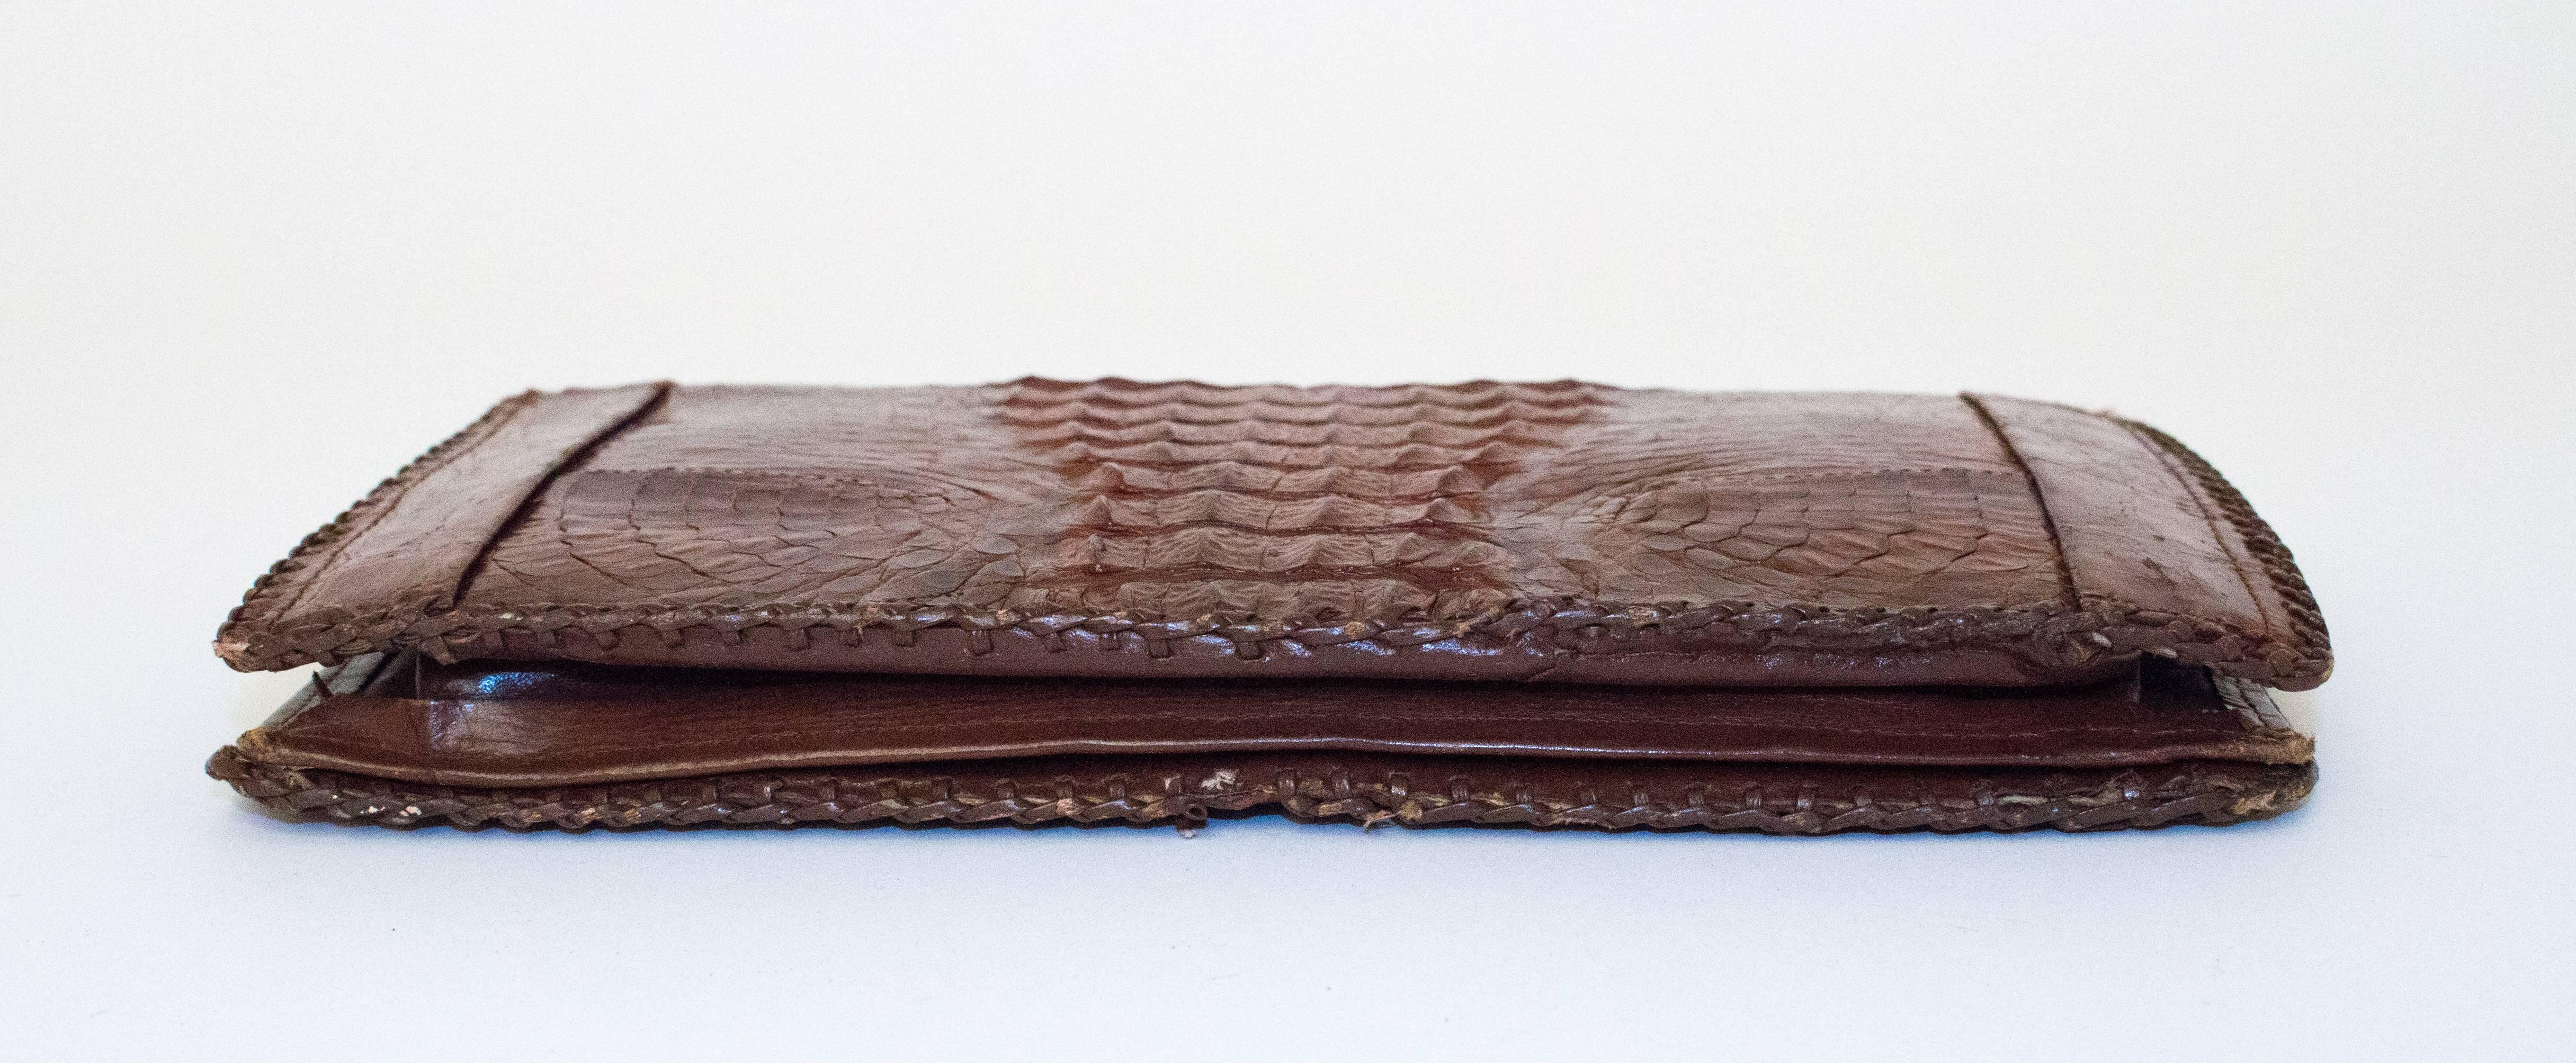 30s Sienna Brown Hornback Crocodile Clutch. Snap closure. One zippered section, and one open pocket. 3 interior compartments. 

Measurements:
11 1/4